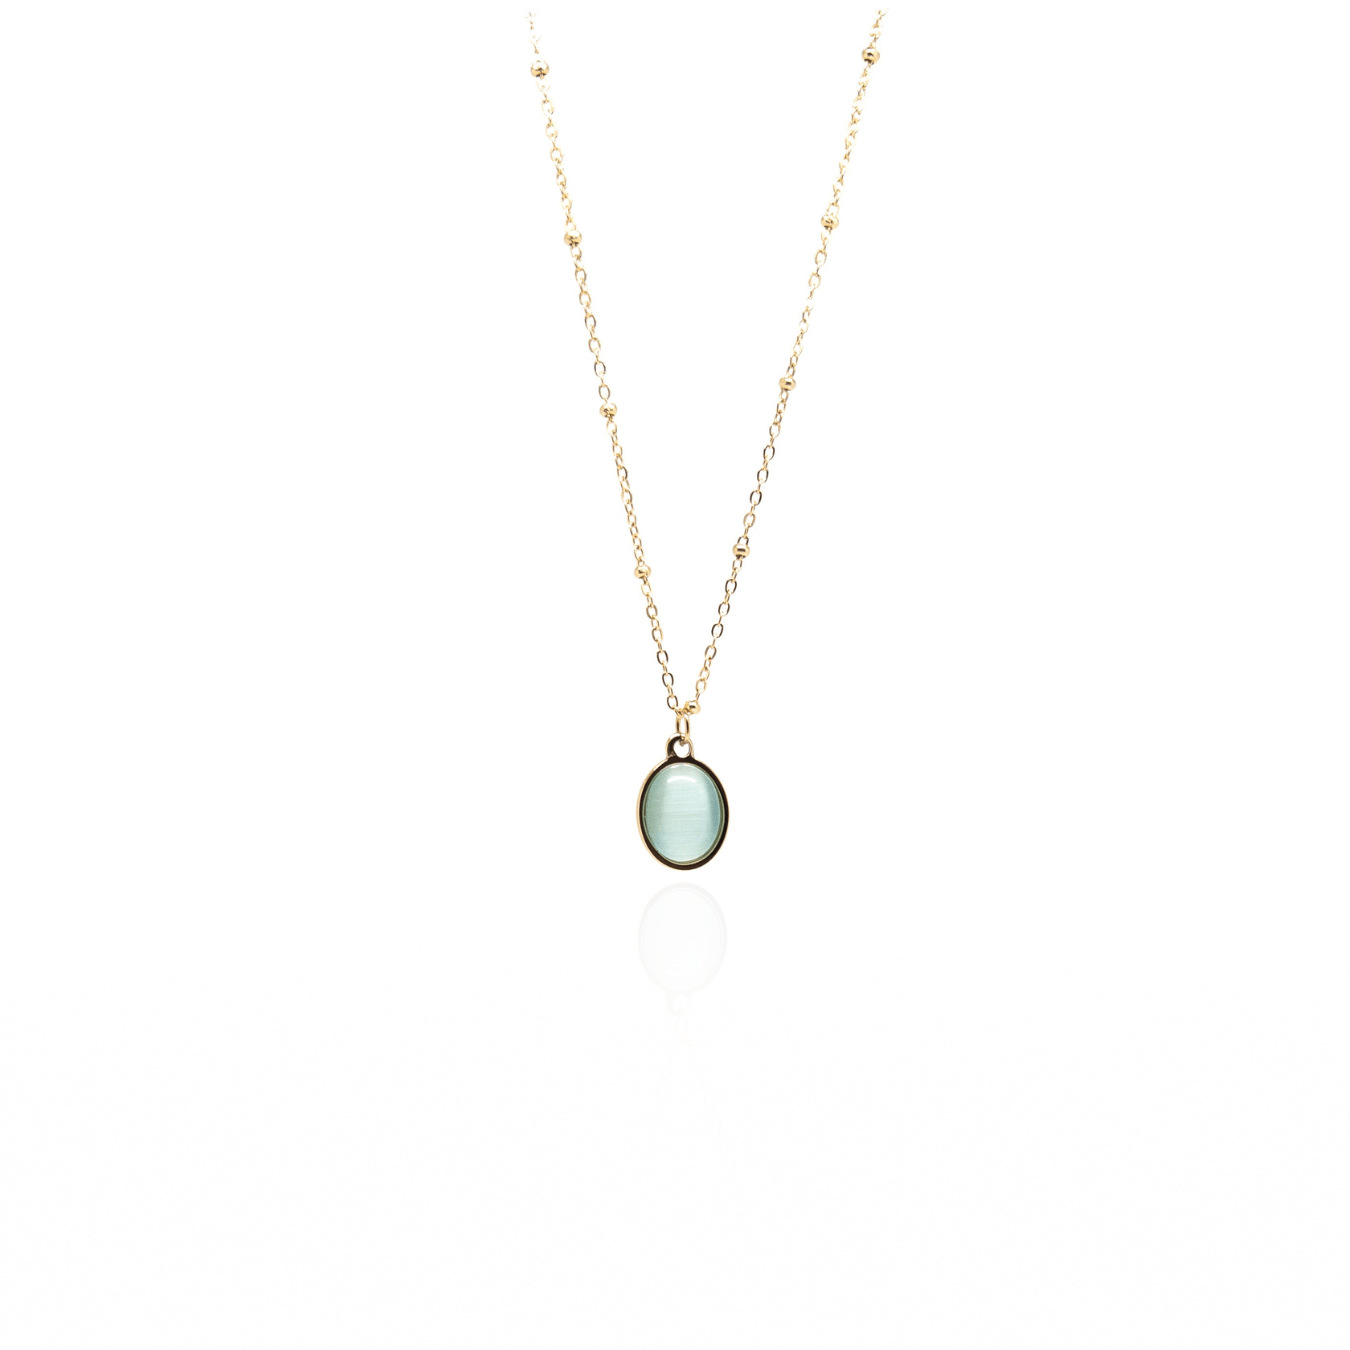 The Light Blue Stone Necklace